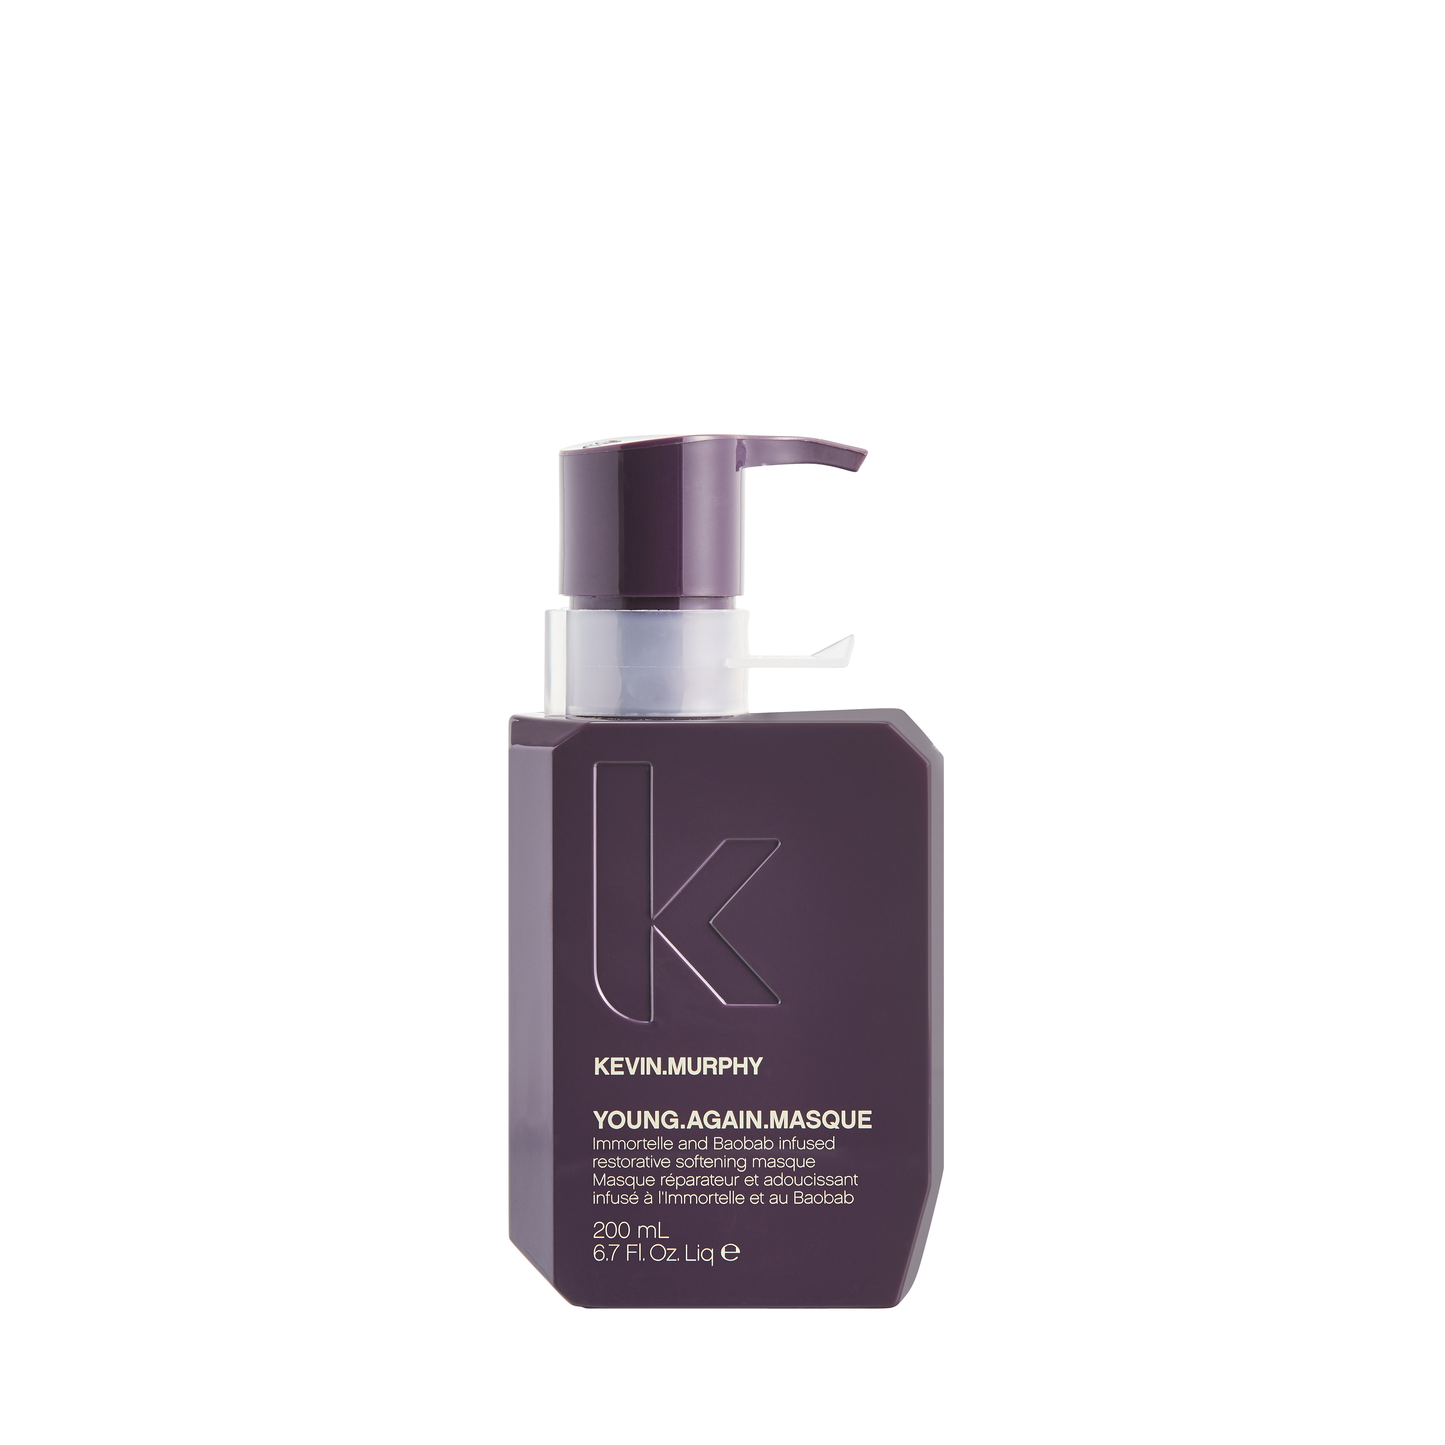 KEVIN.MURPHY - YOUNG.AGAIN.MASQUE